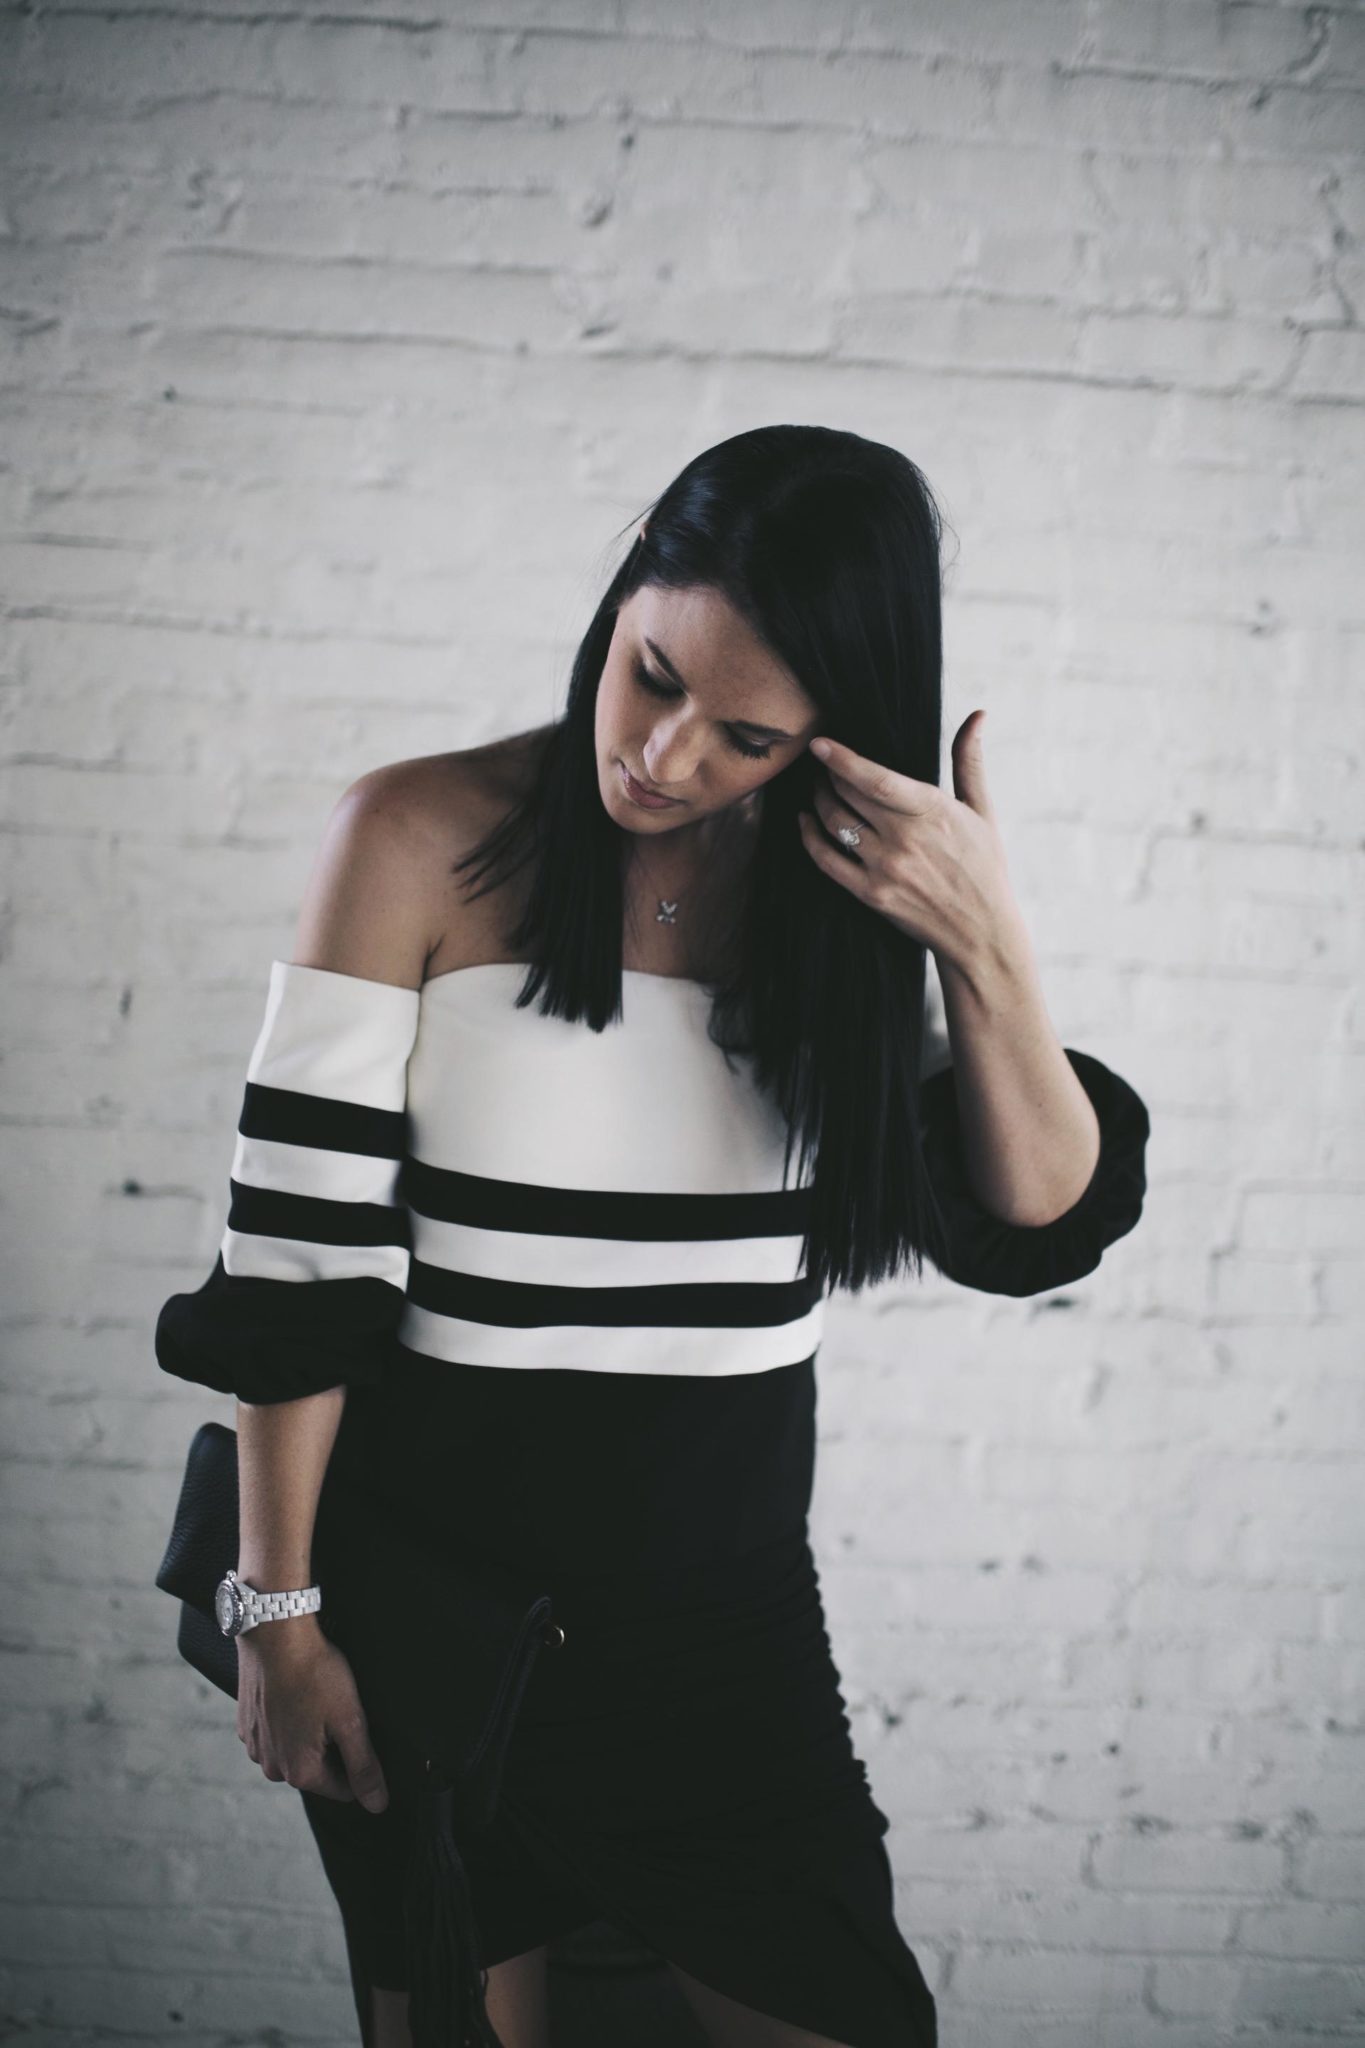 Off-the-Shoulder Striped Black and White Top and Black Skirt | summer fashion tips | summer outfit ideas | summer style tips | what to wear for summer | warm weather fashion | fashion for summer | style tips for summer | outfit ideas for summer || Dressed to Kill